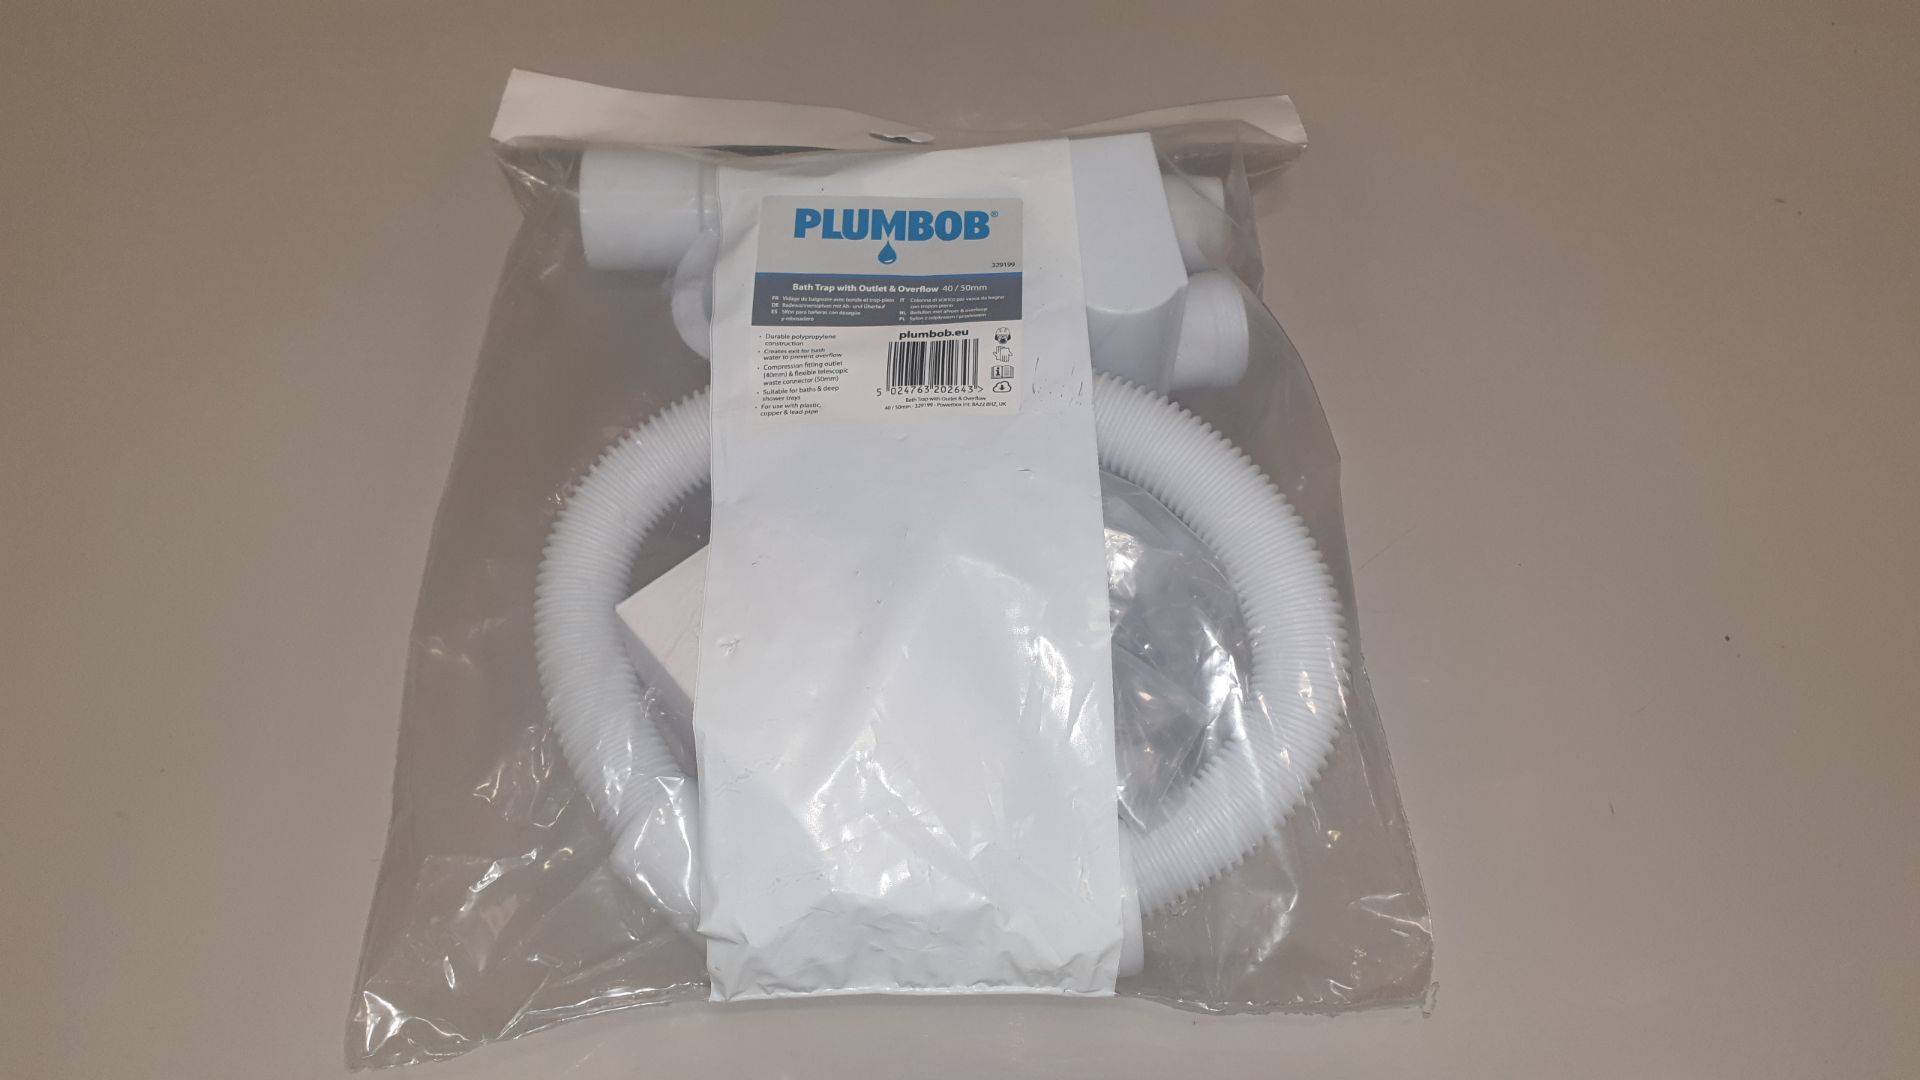 15 X BRAND NEW PLUMBOB BATH TRAP WITH OUTLET & OVERFLOW 40/50MM (PROD CODE 329199) TRADE PRICE £27.